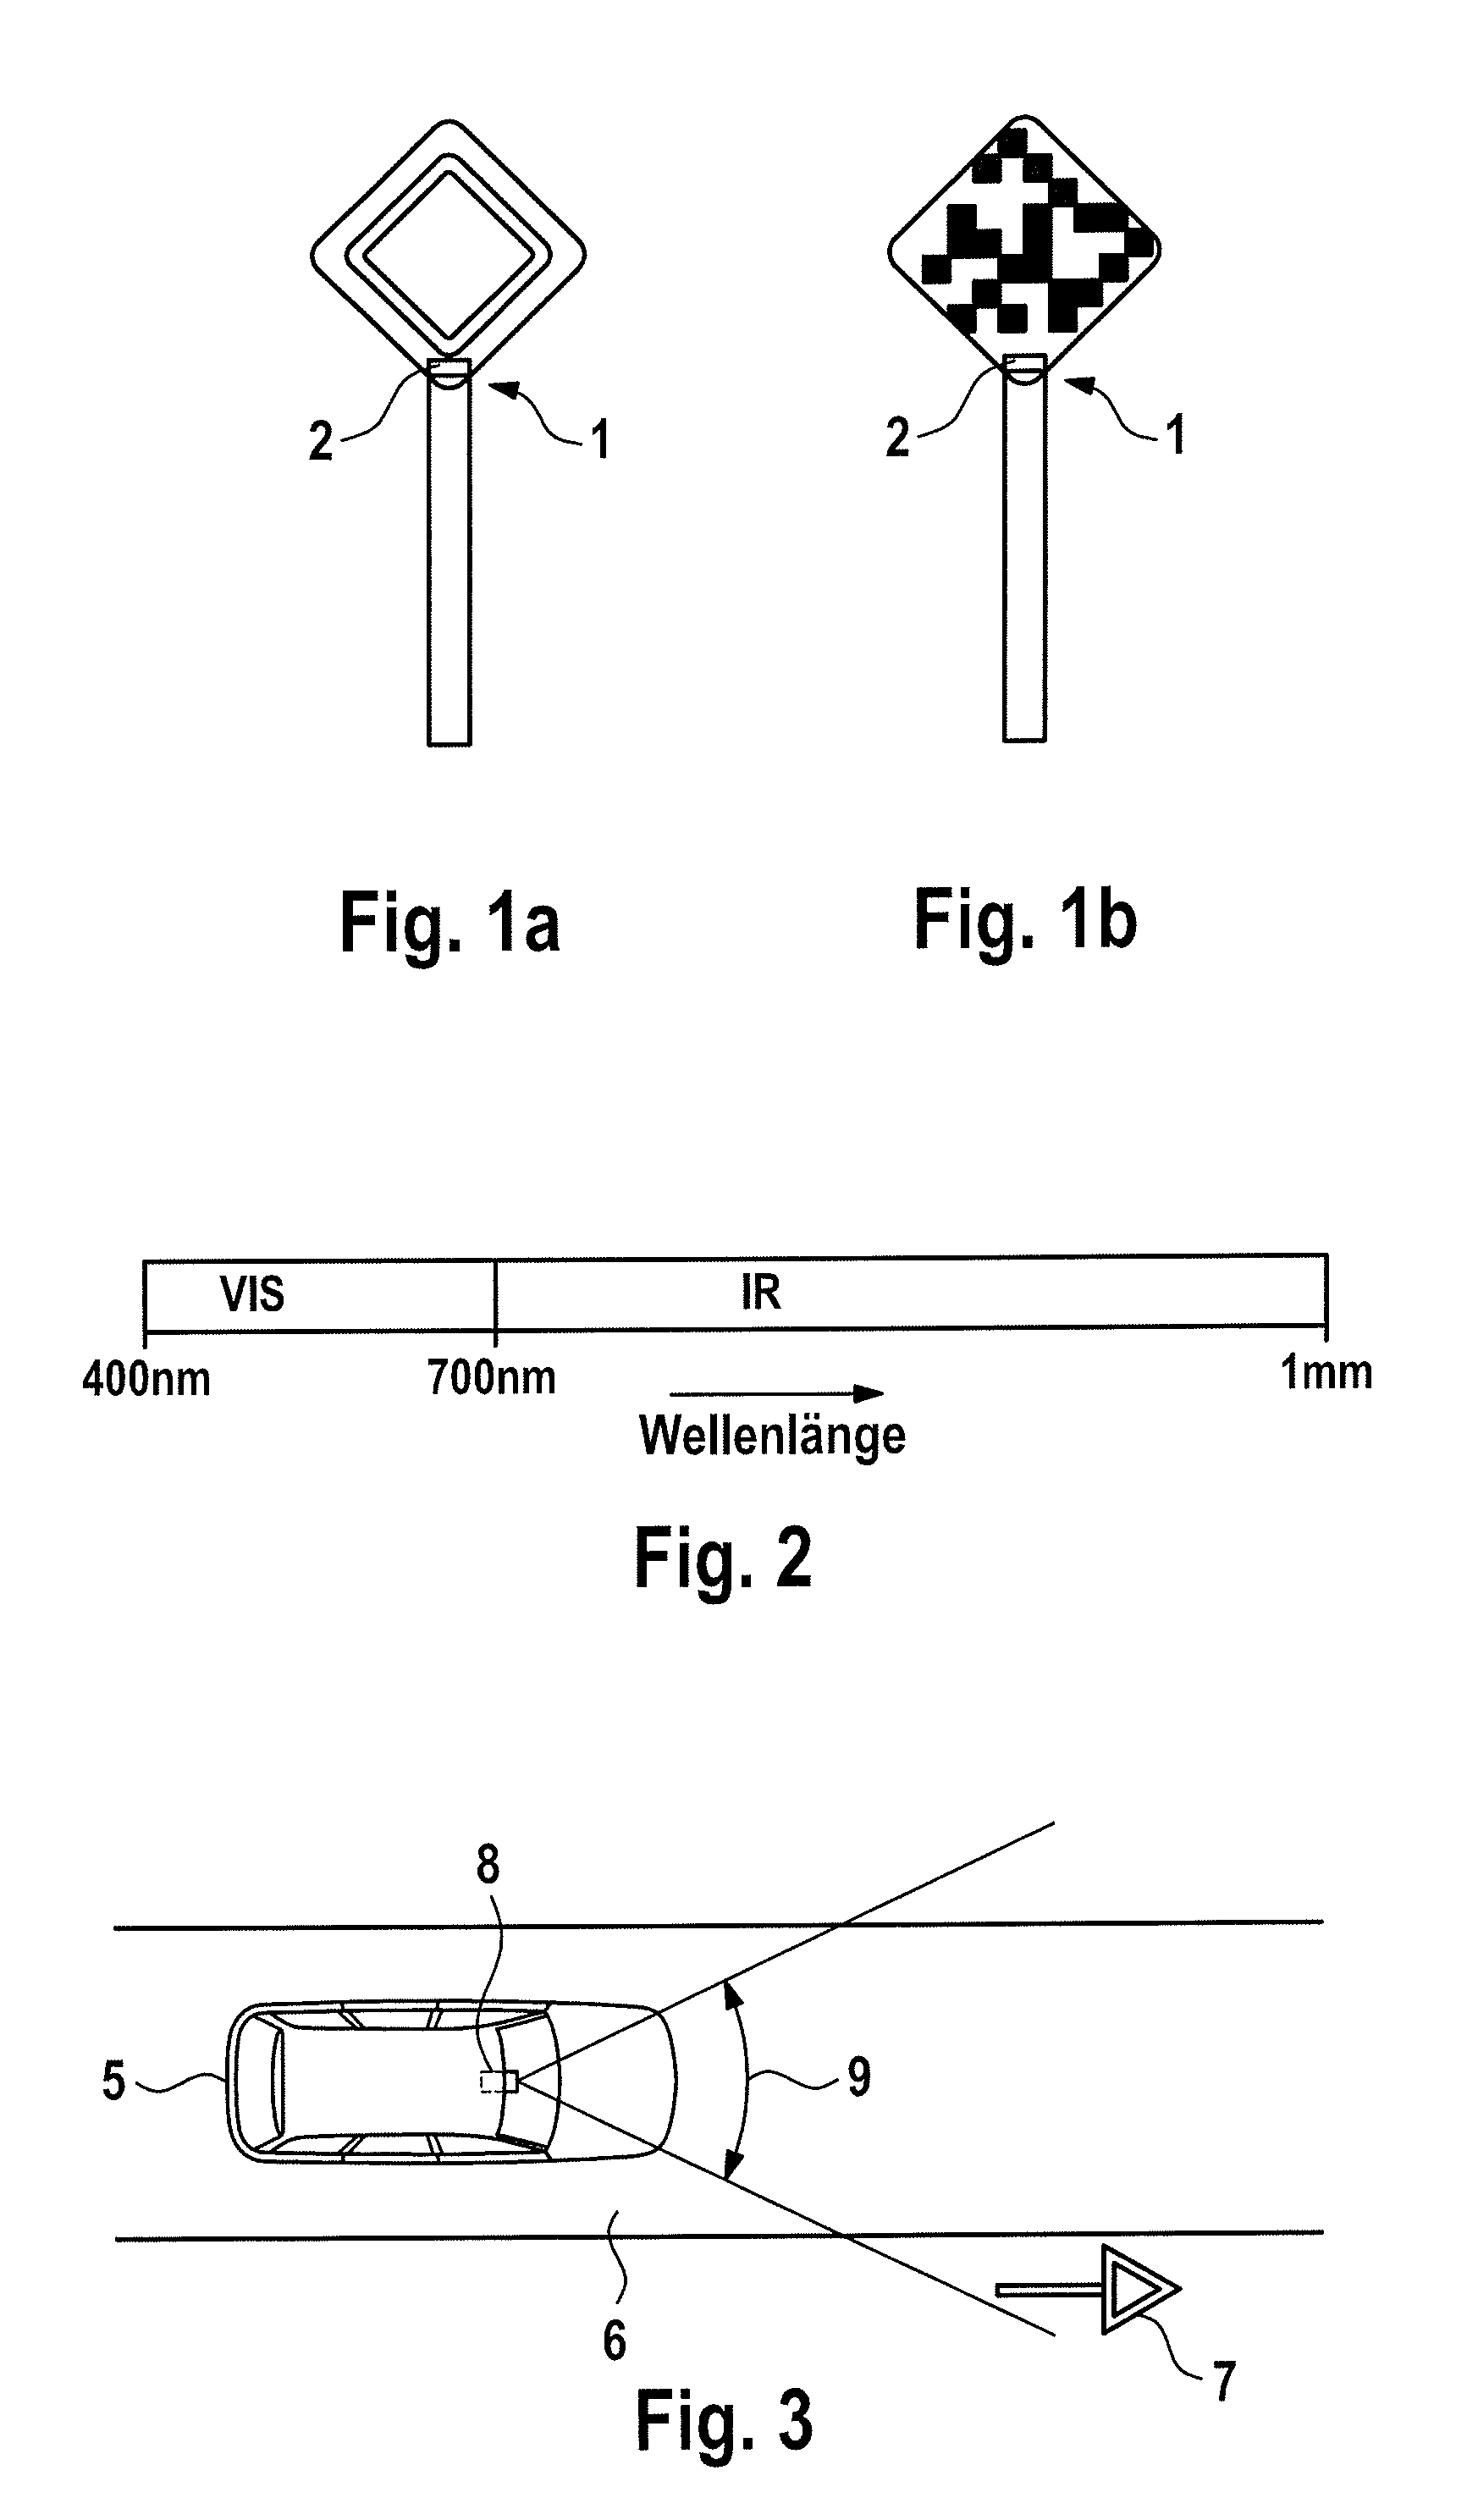 Signal transmitter, system and method for highlighting objects in road traffic, use of the system, and use of the signal transmitter